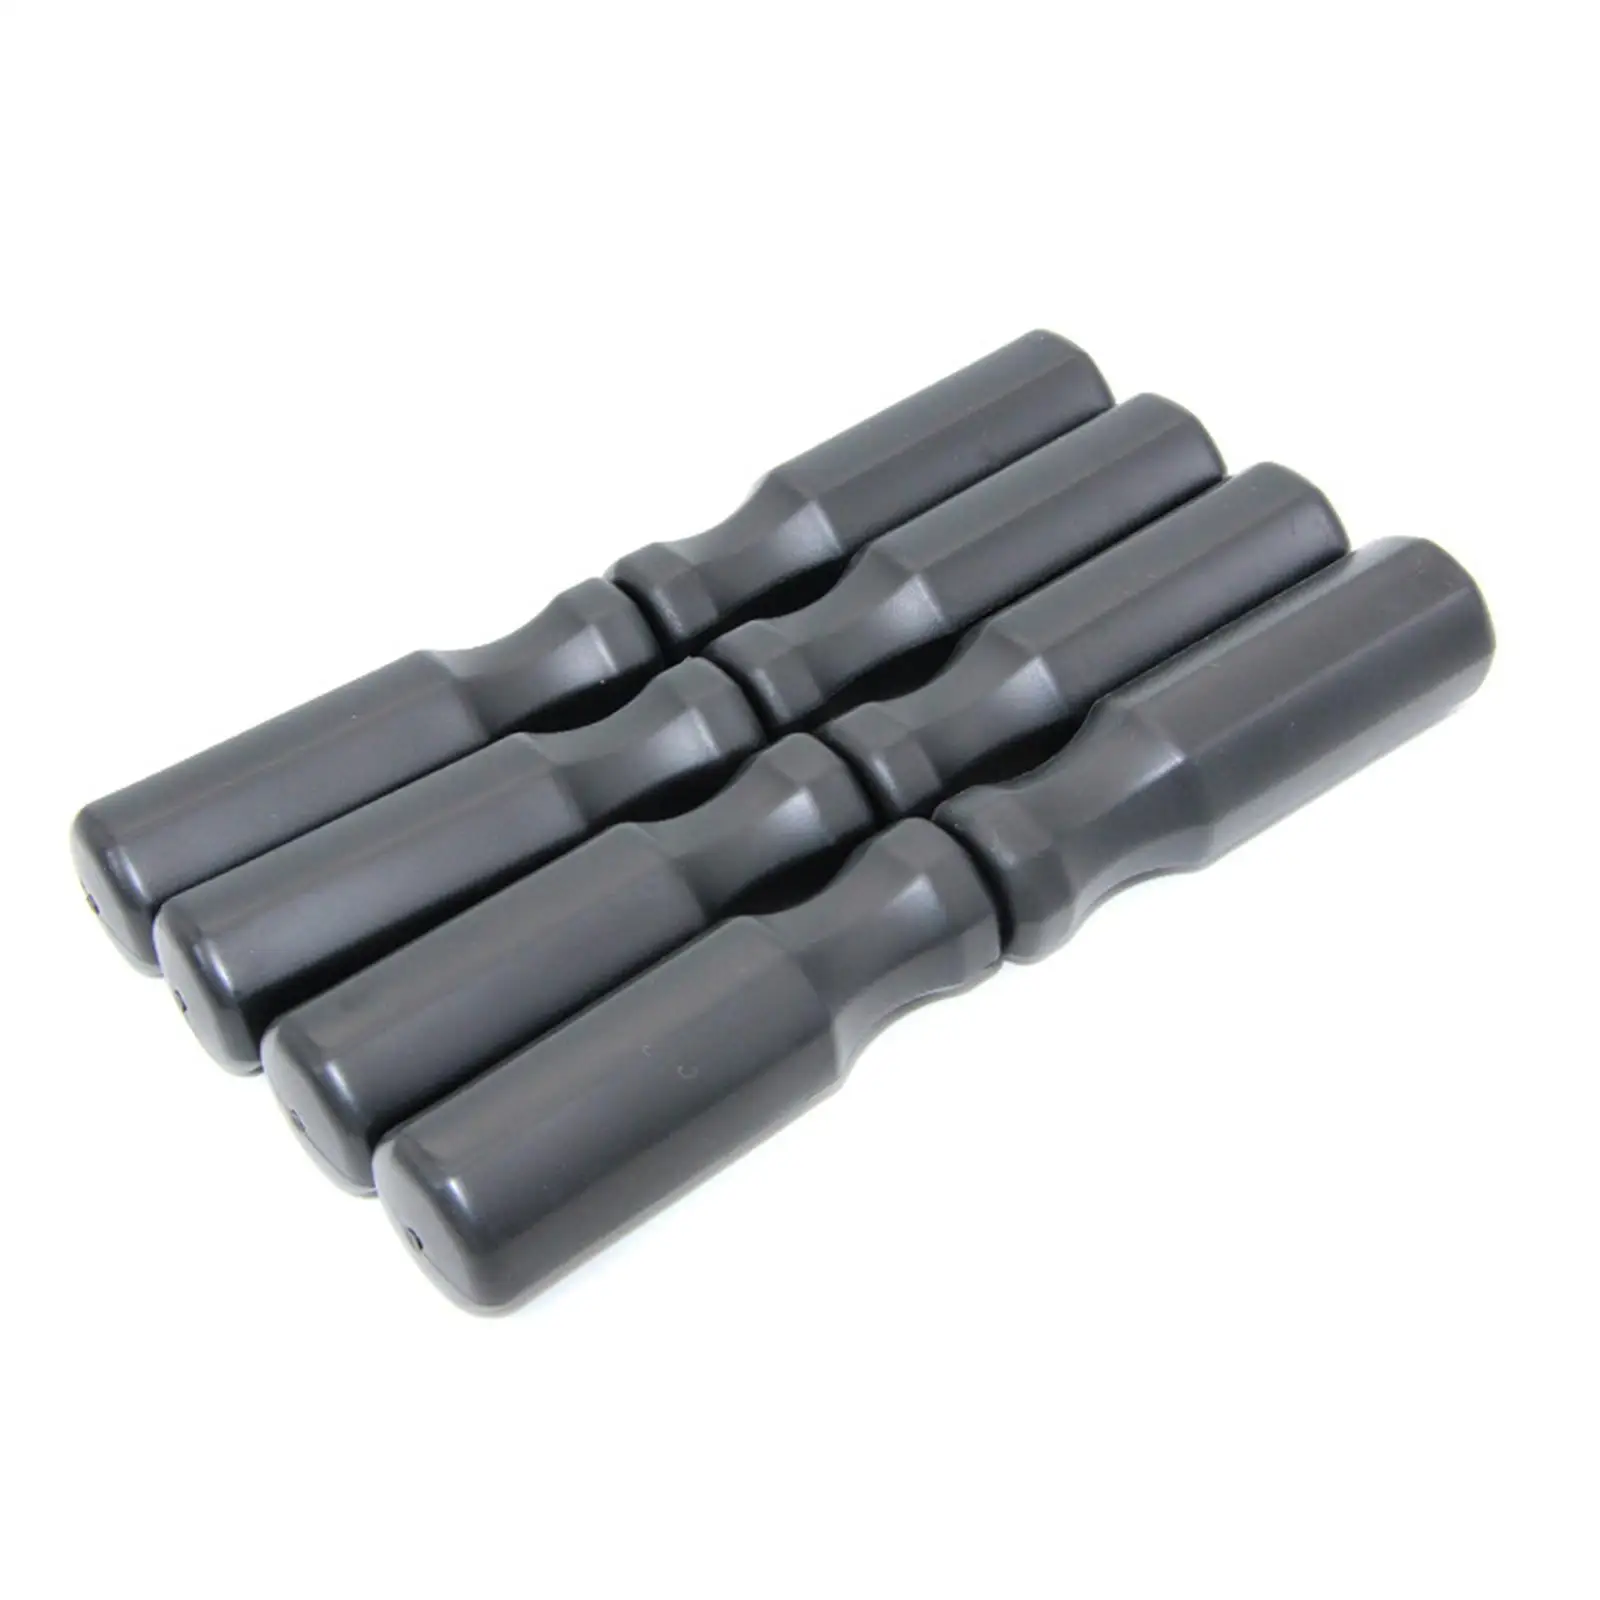 8Pcs Foosball Handle Grip Rod Octagonal Replacement Handles for Table Soccer